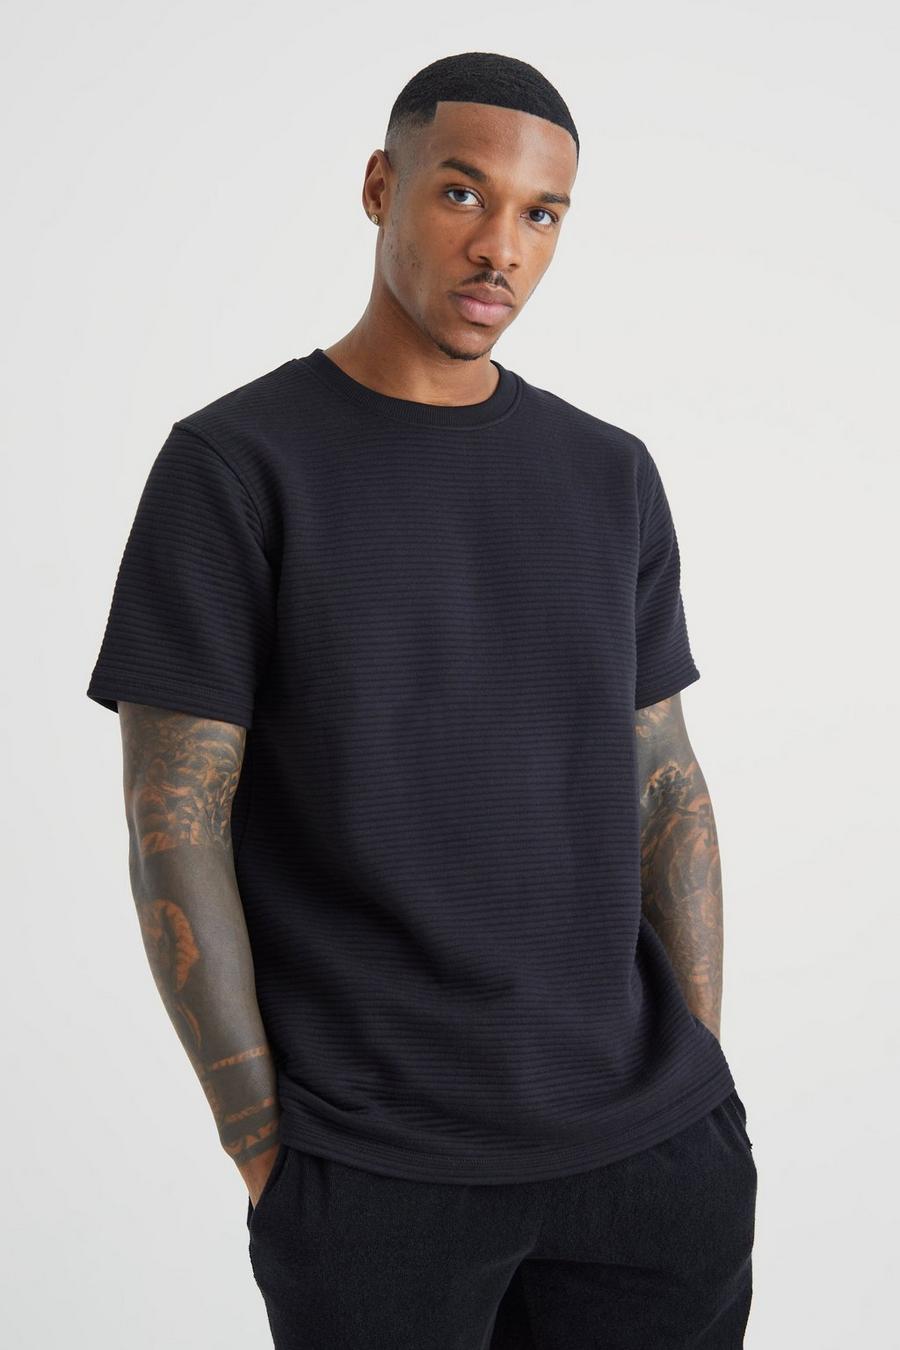 T-shirt Slim Fit in jersey a coste, Black negro